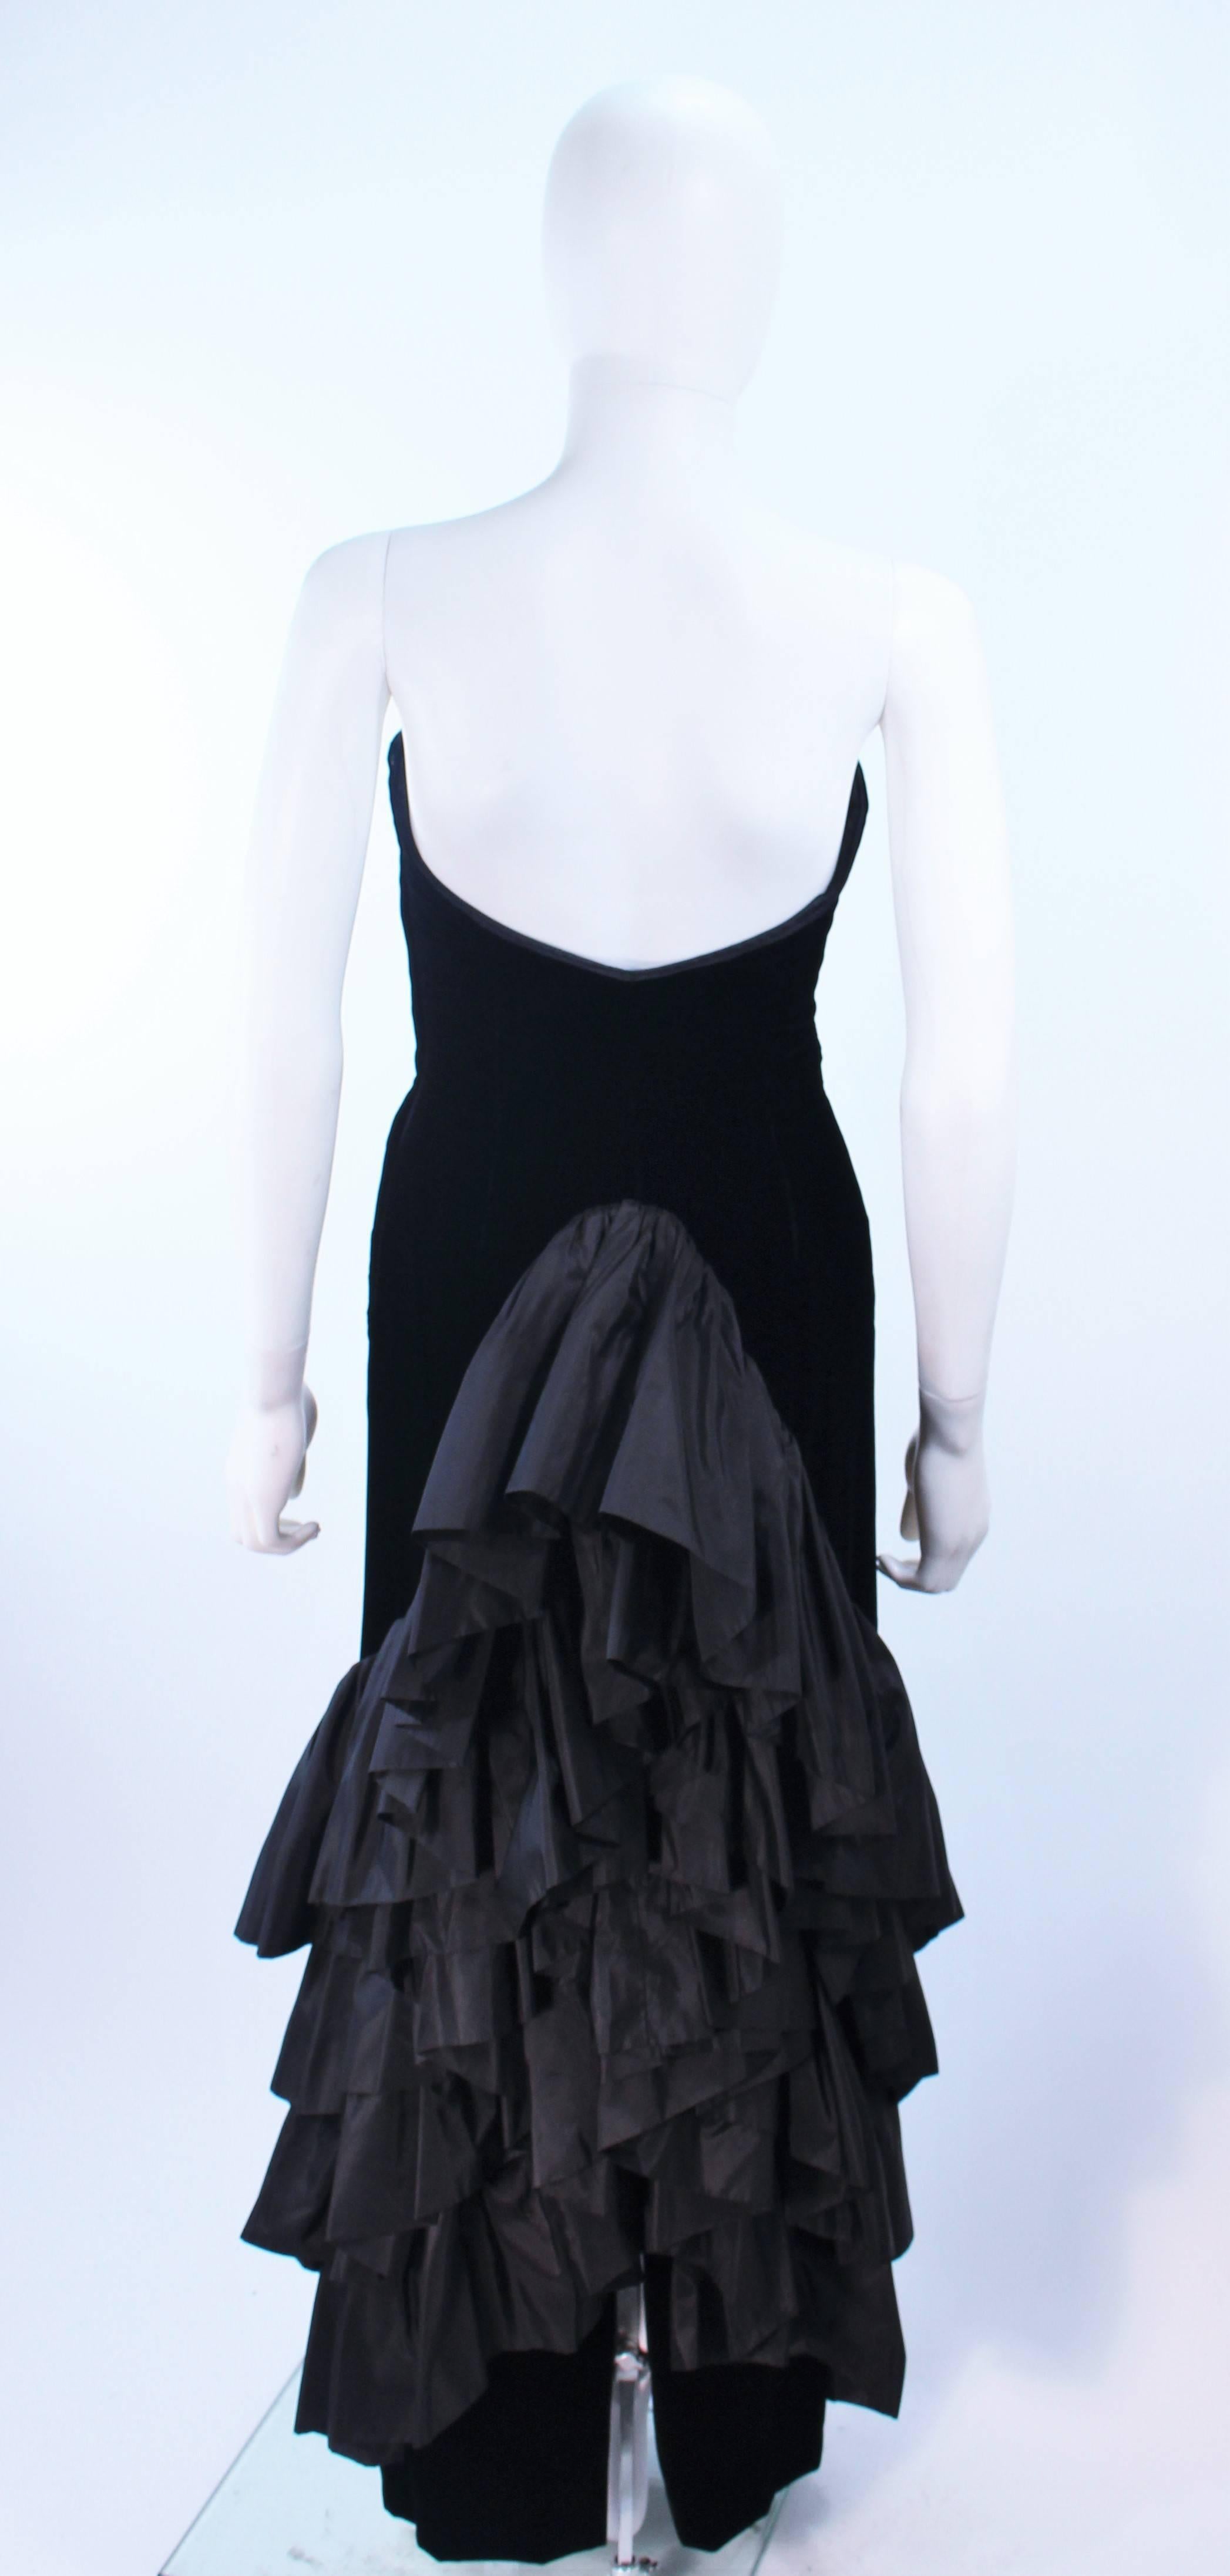 VICKY TIEL Black Velvet Gown with Dramatic Tiered Back and Hem Size 36 5